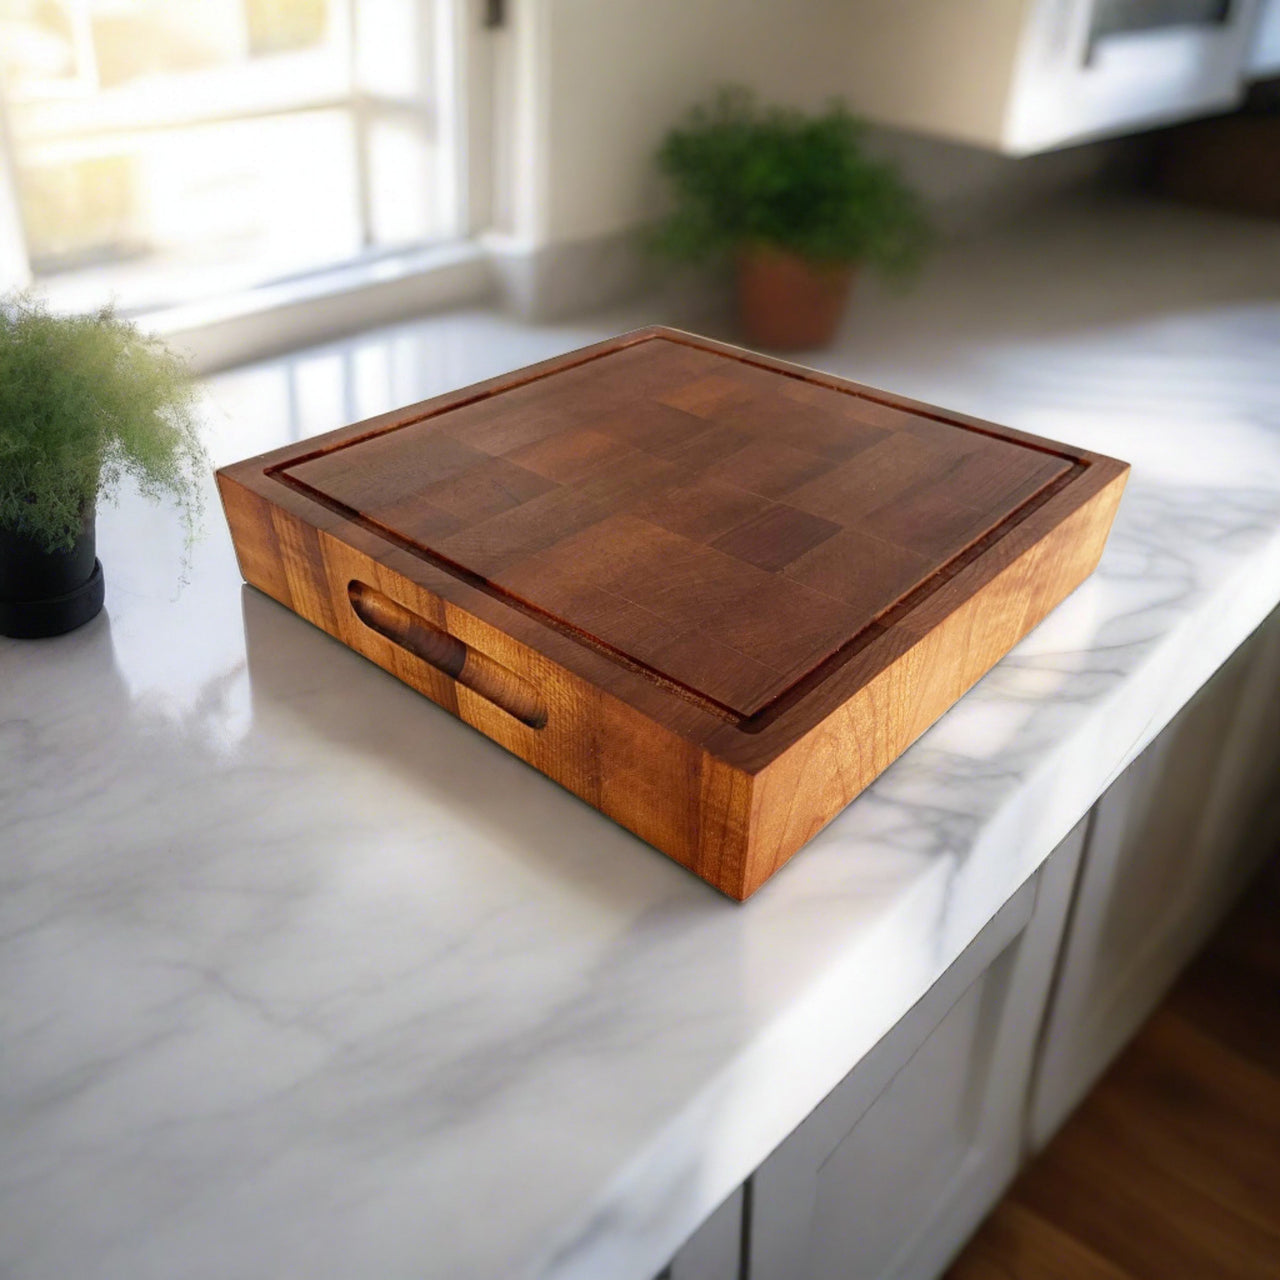 Toasted Maple End Grain Butcher Block "The Avoca"